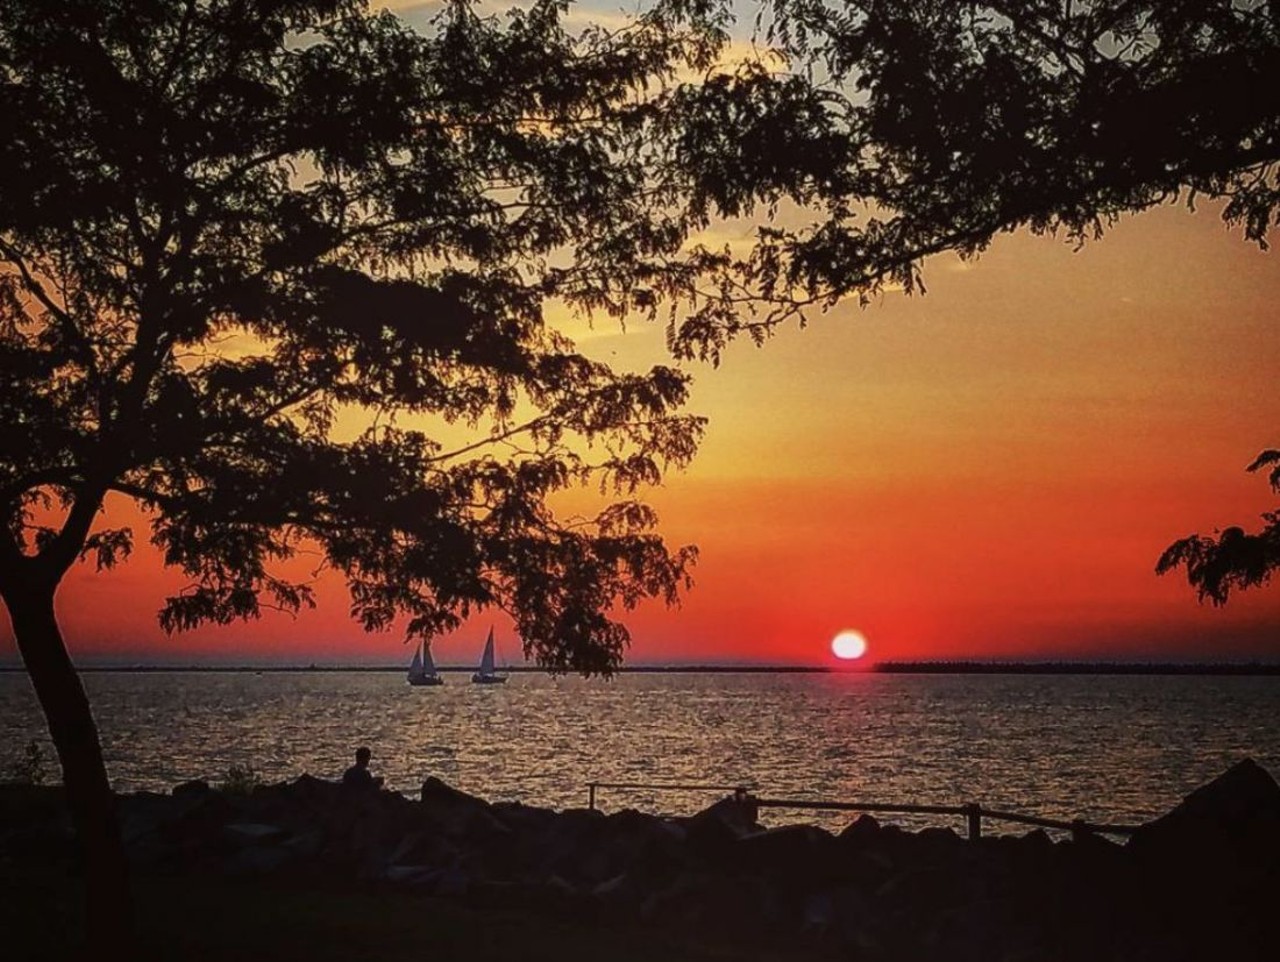  E55 On The Lake
5555 North Marginal Rd., Cleveland
The Metroparks has totally revived this beautiful lookout point of Lake Erie by adding a bar, restaurant and bait shop to this spot. There&#146;s also live music on Saturdays and some of the best views in town.
Photo via @WonderWoman415/Instagram